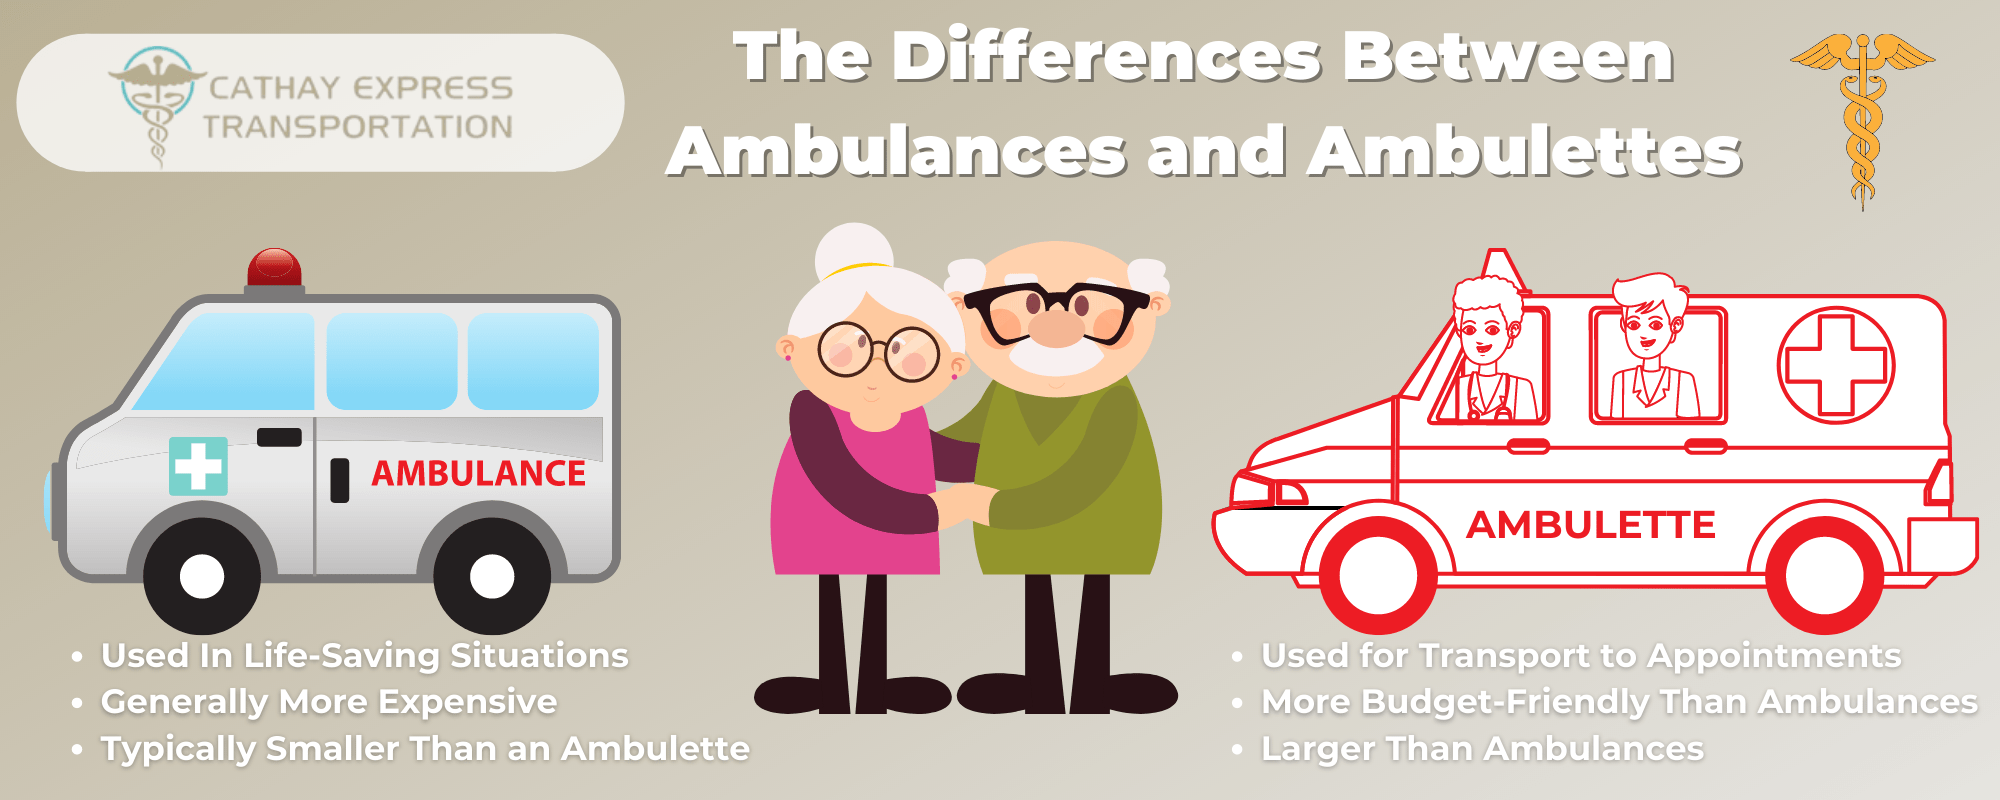 Infographic explaining the differences between ambulances and ambulettes